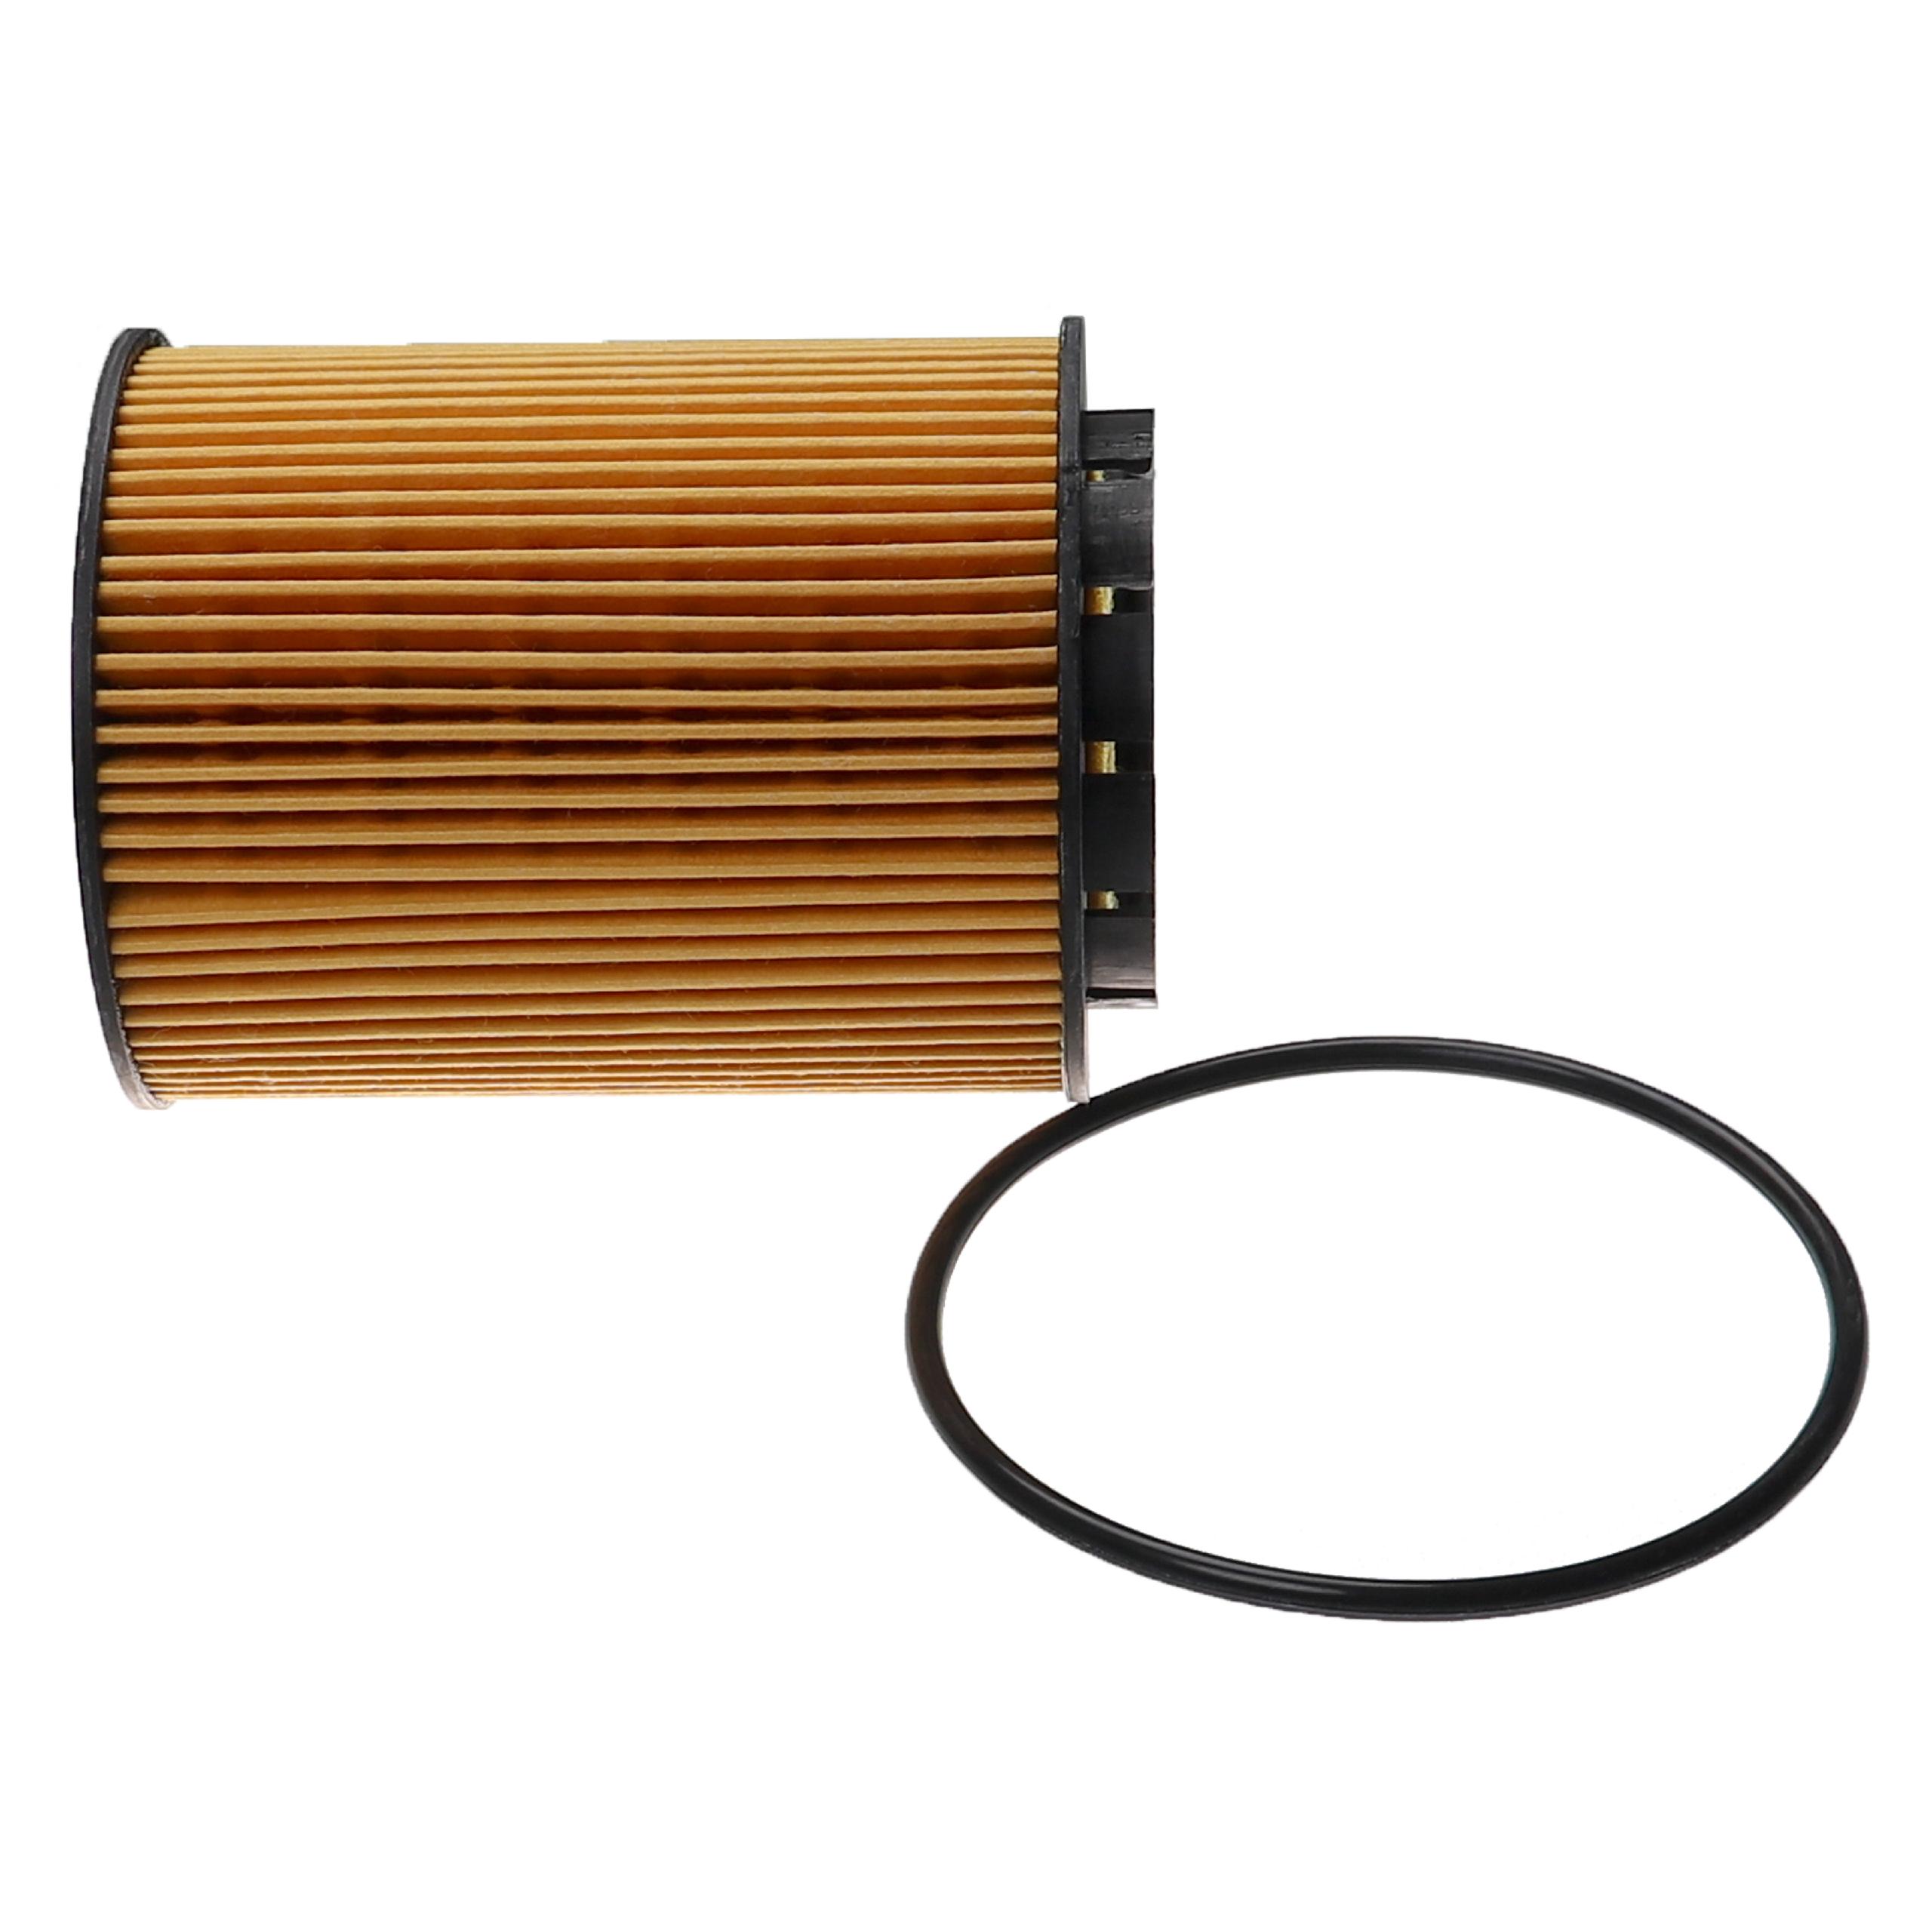 Vehicle Oil Filter as Replacement for A.L. filter ALO-8122 - Spare Filter